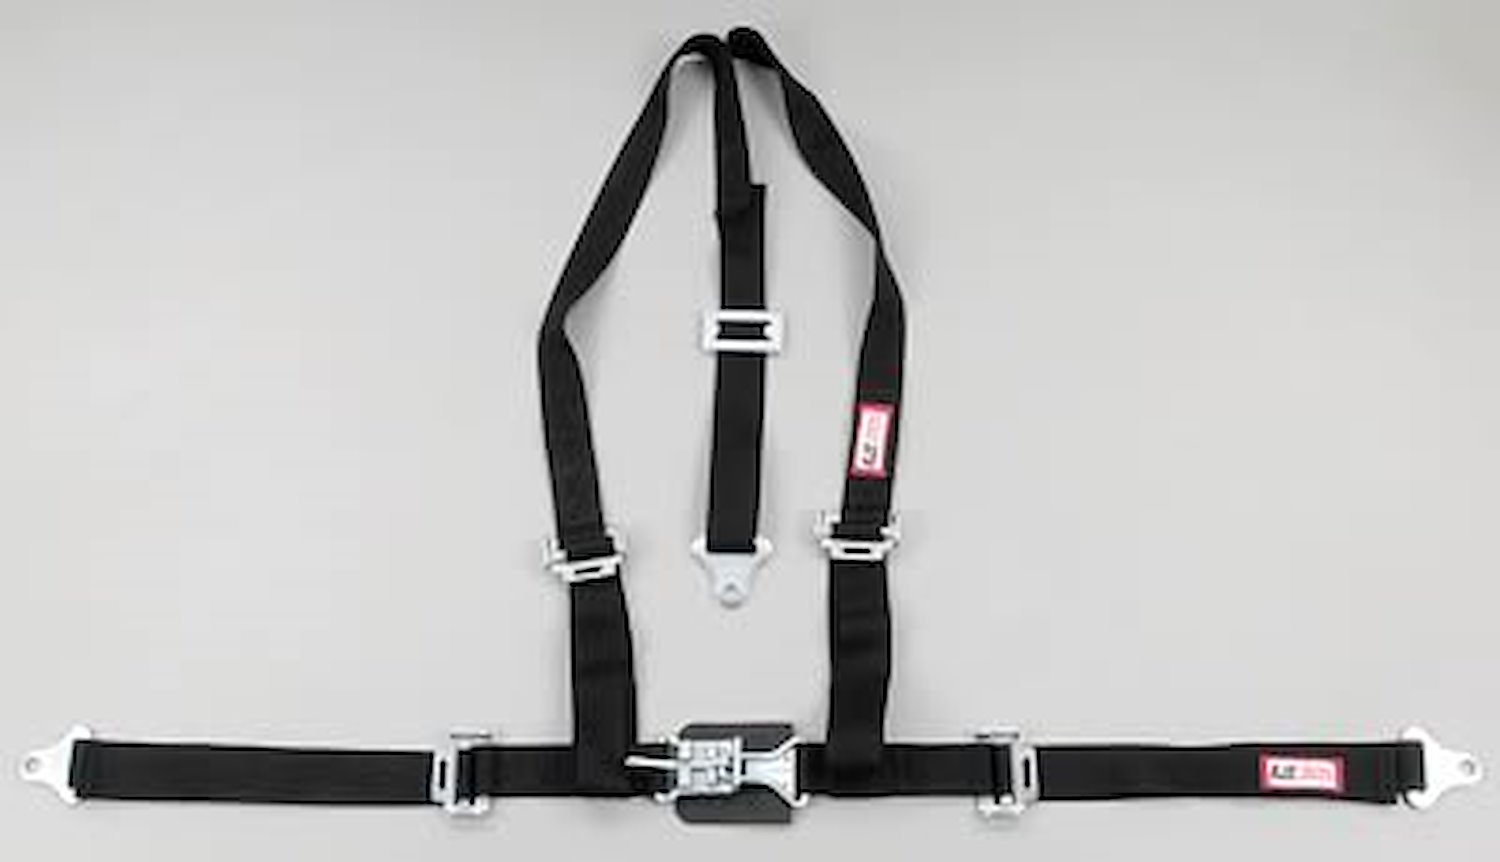 NON-SFI L&L HARNESS 2 PULL DOWN Lap Belt w/Adjuster 2 S.H. Individual FLOOR MOUNT w/STERNUM STRAP ALL WRAP ENDS GRAY